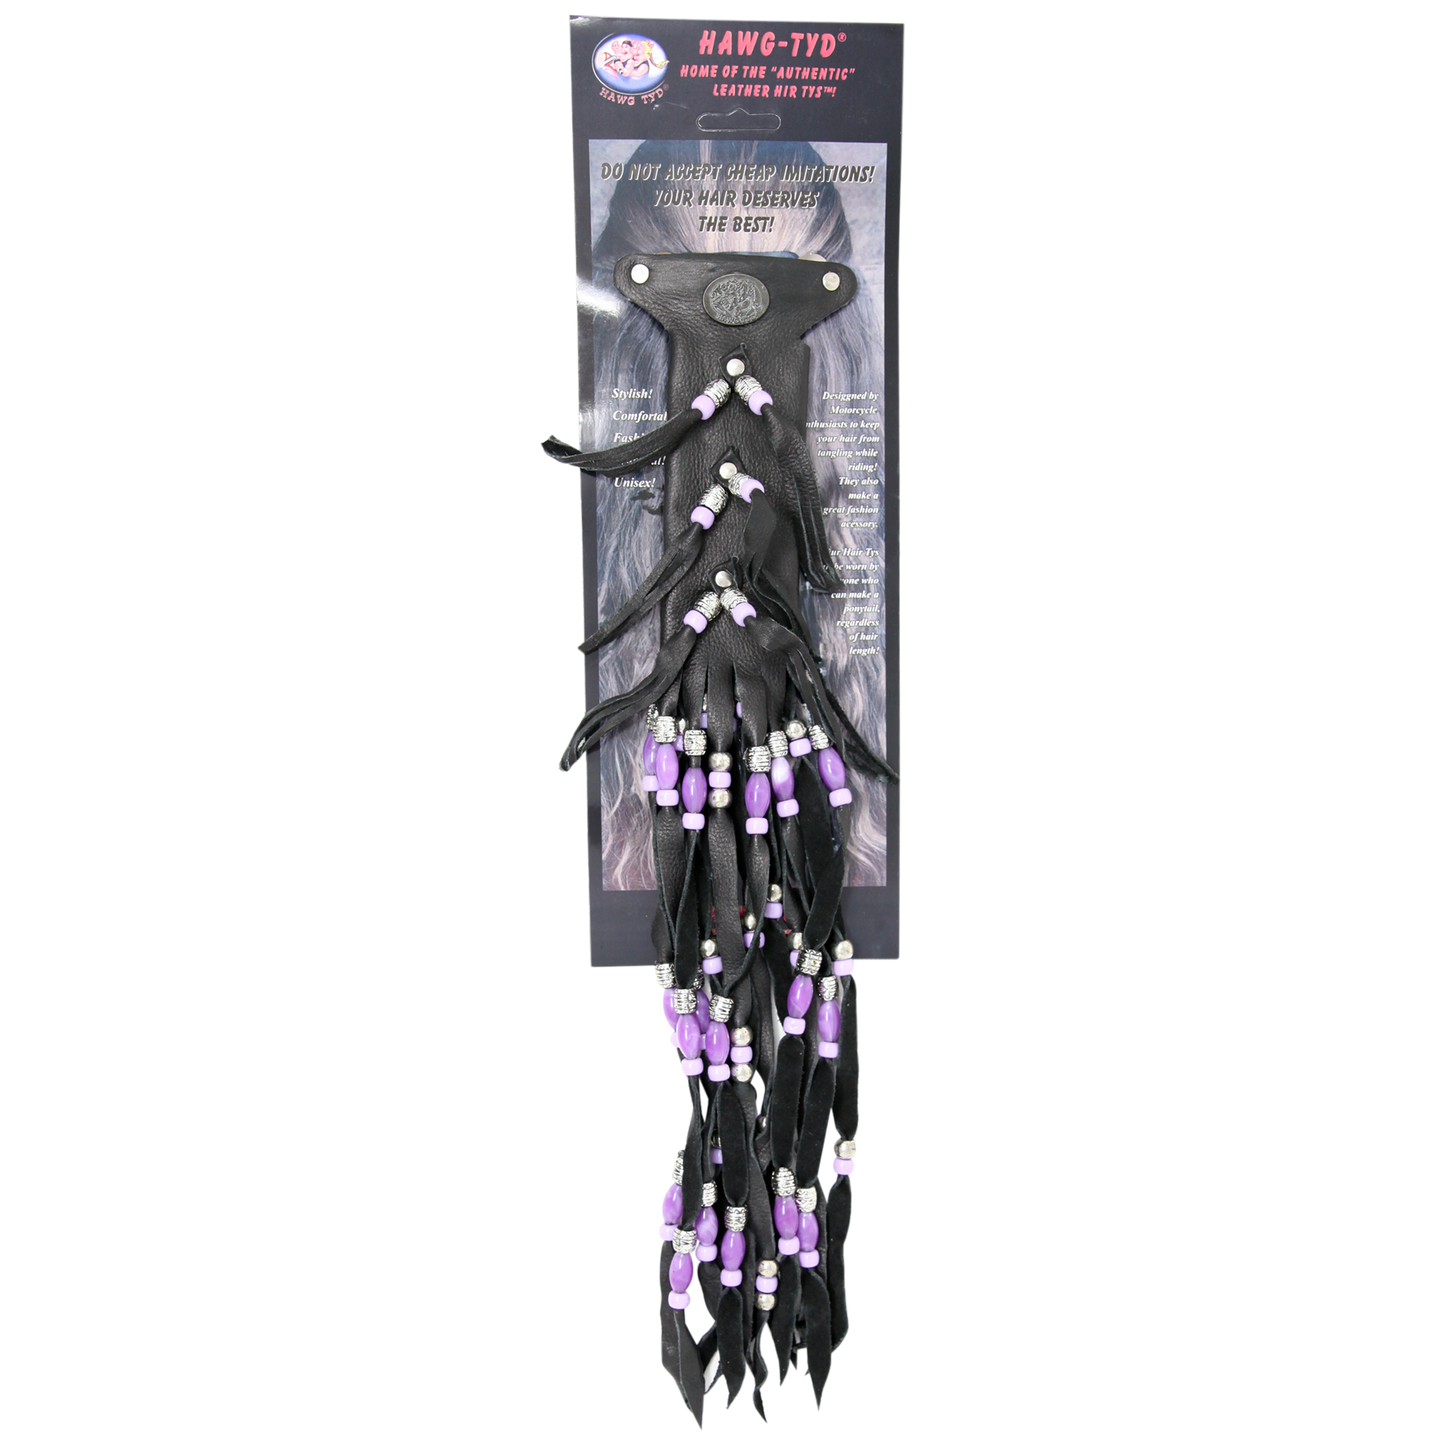 HTPurple "Hawg Tyd" The Authentic Leather Hair TYS - Purple Beads